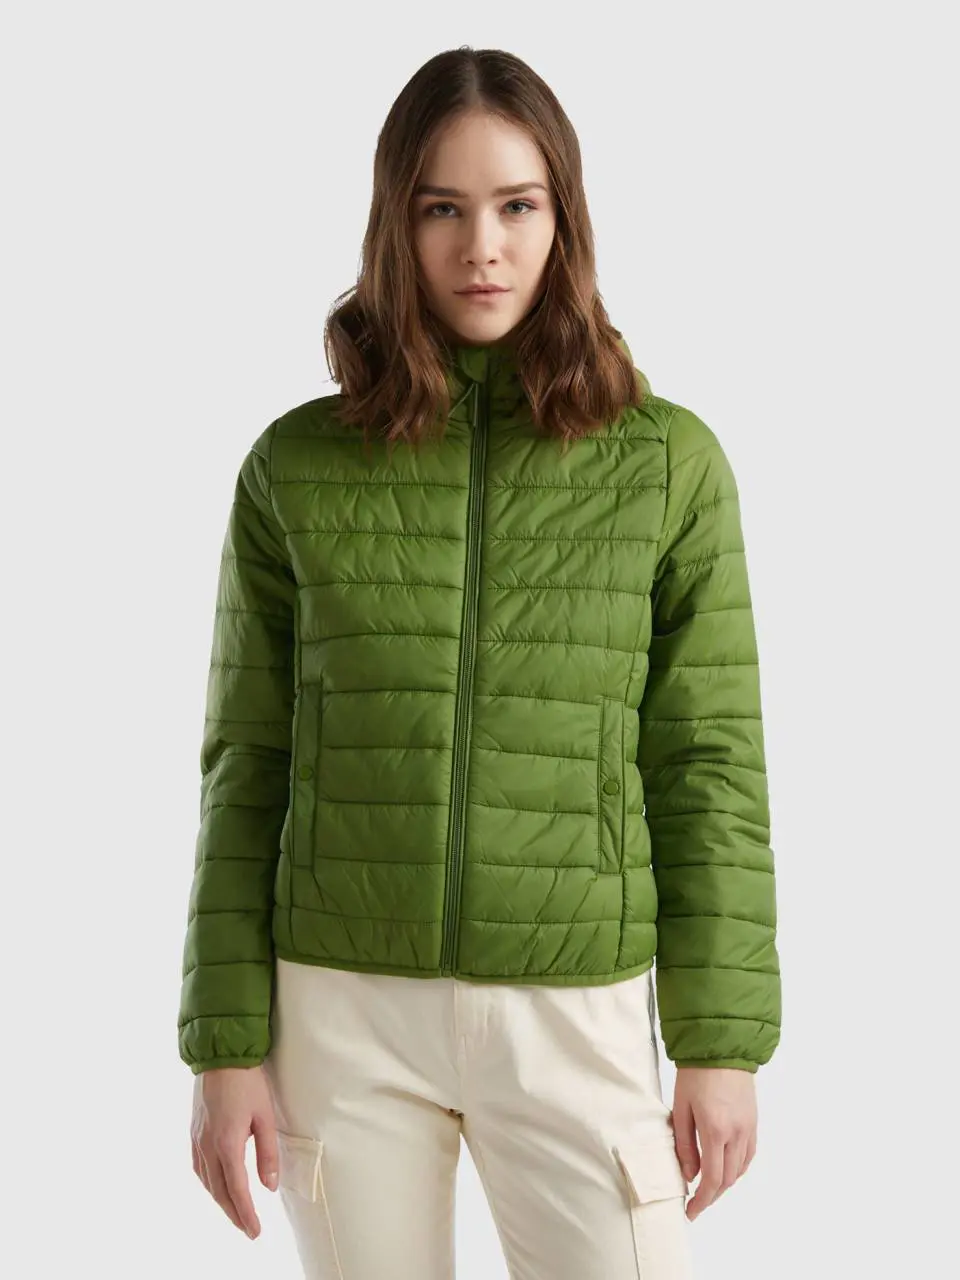 Benetton puffer jacket with recycled wadding. 1